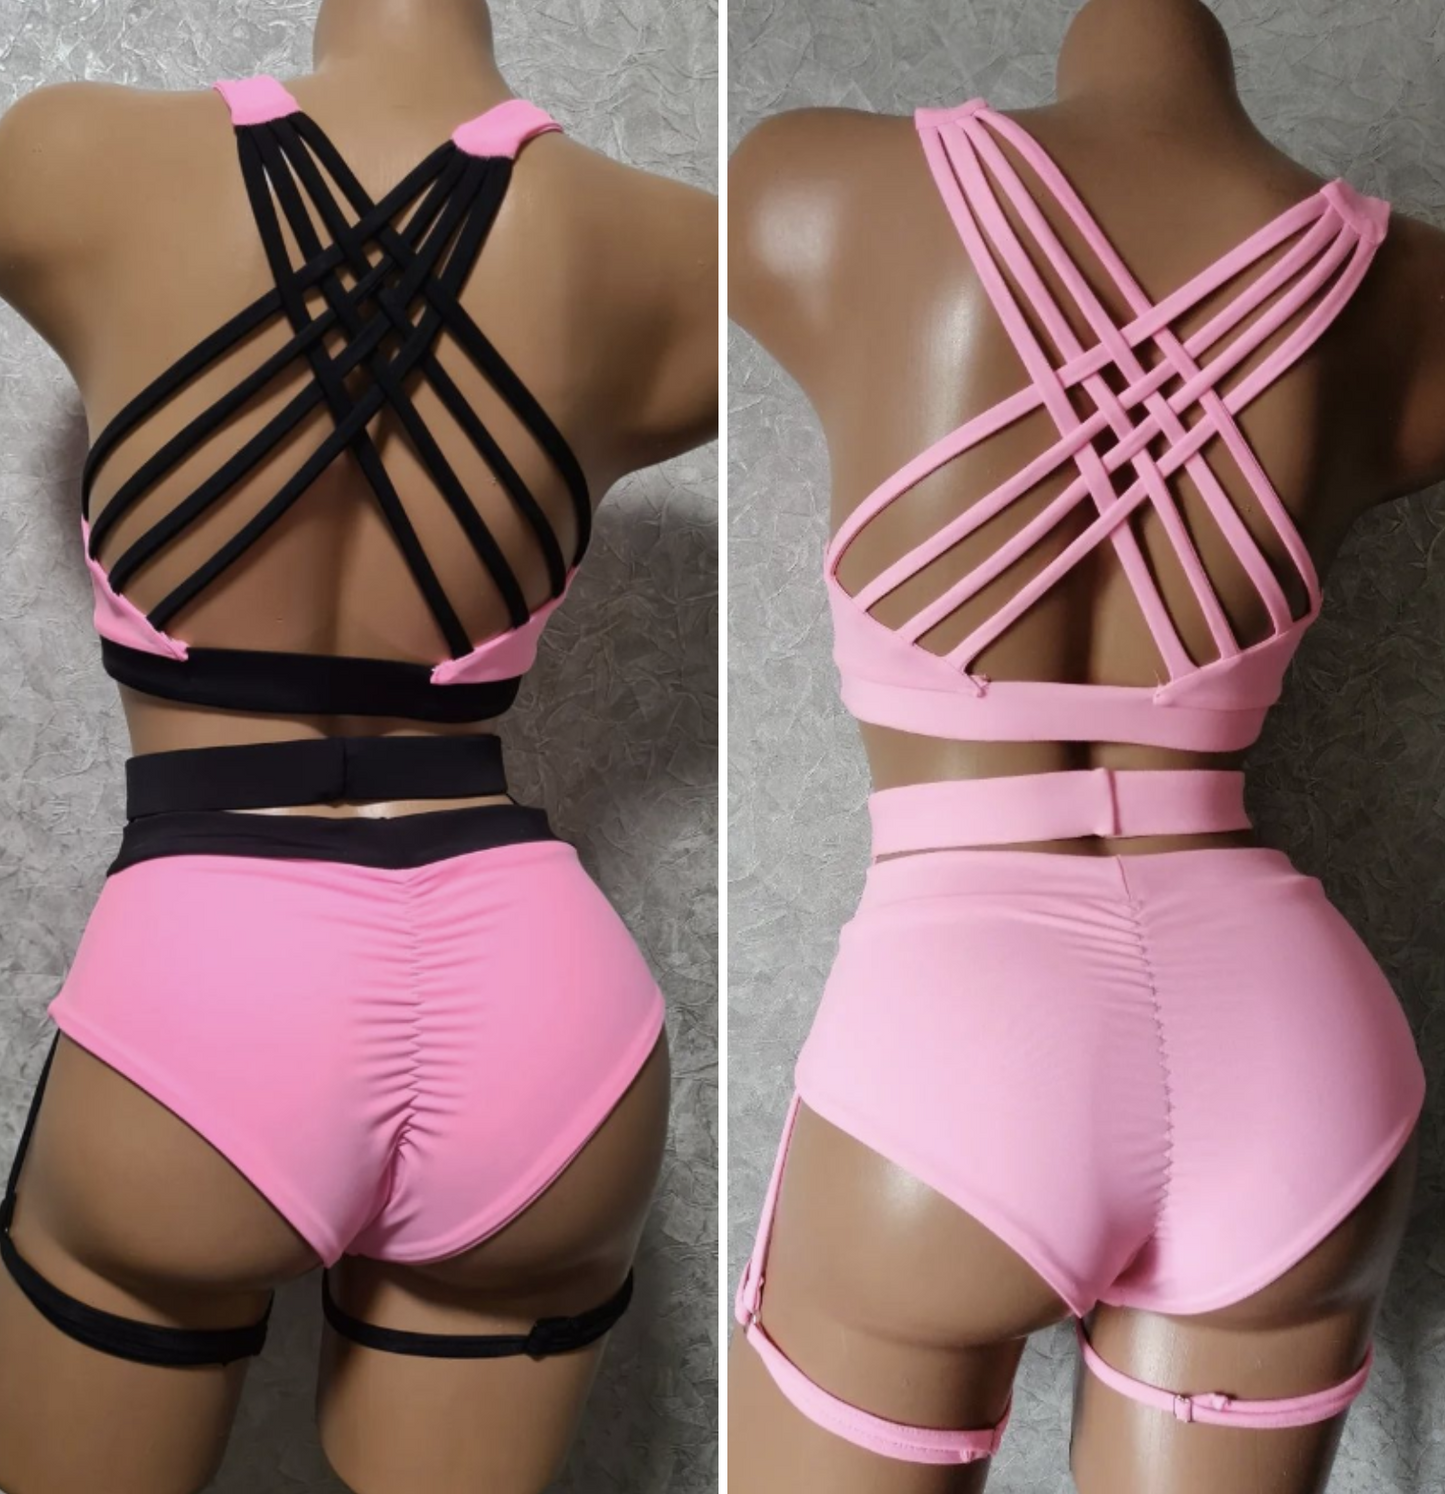 Mid-rise pole dance shorts with garter belt and Braided-back sports bra